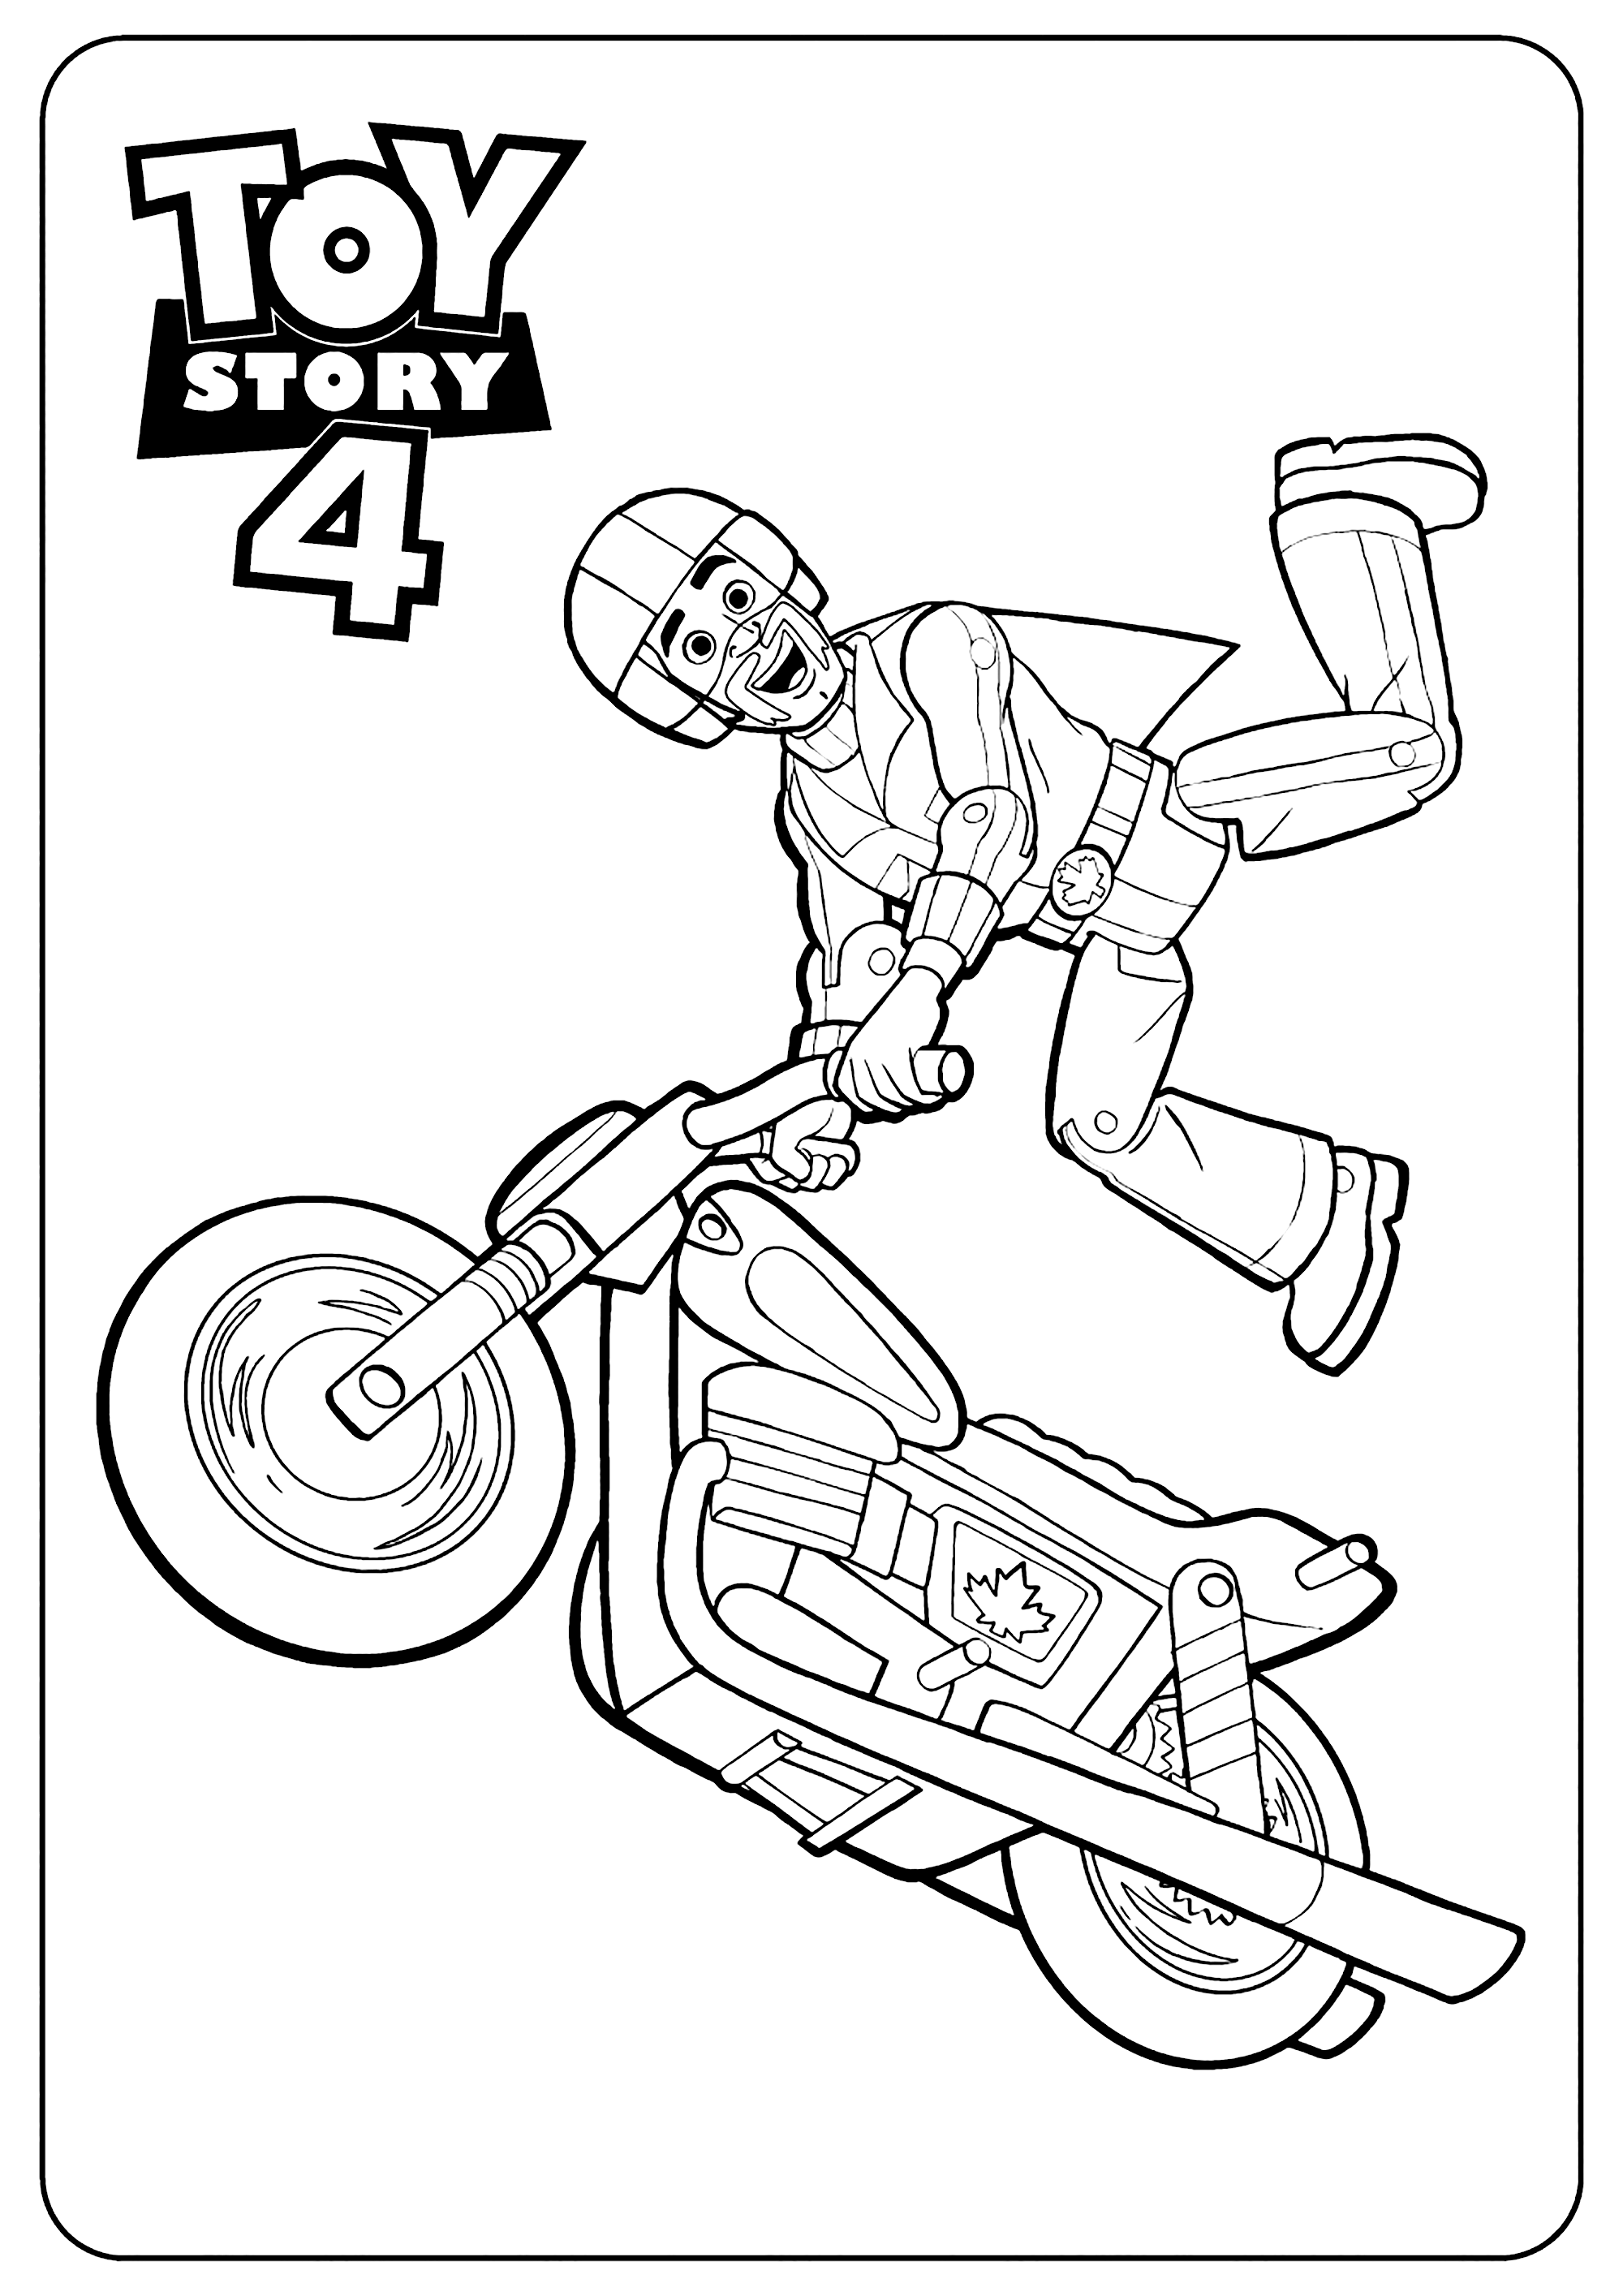 Duke Caboom : Toy Story 4 coloring pages - Toy Story 4 Kids ...